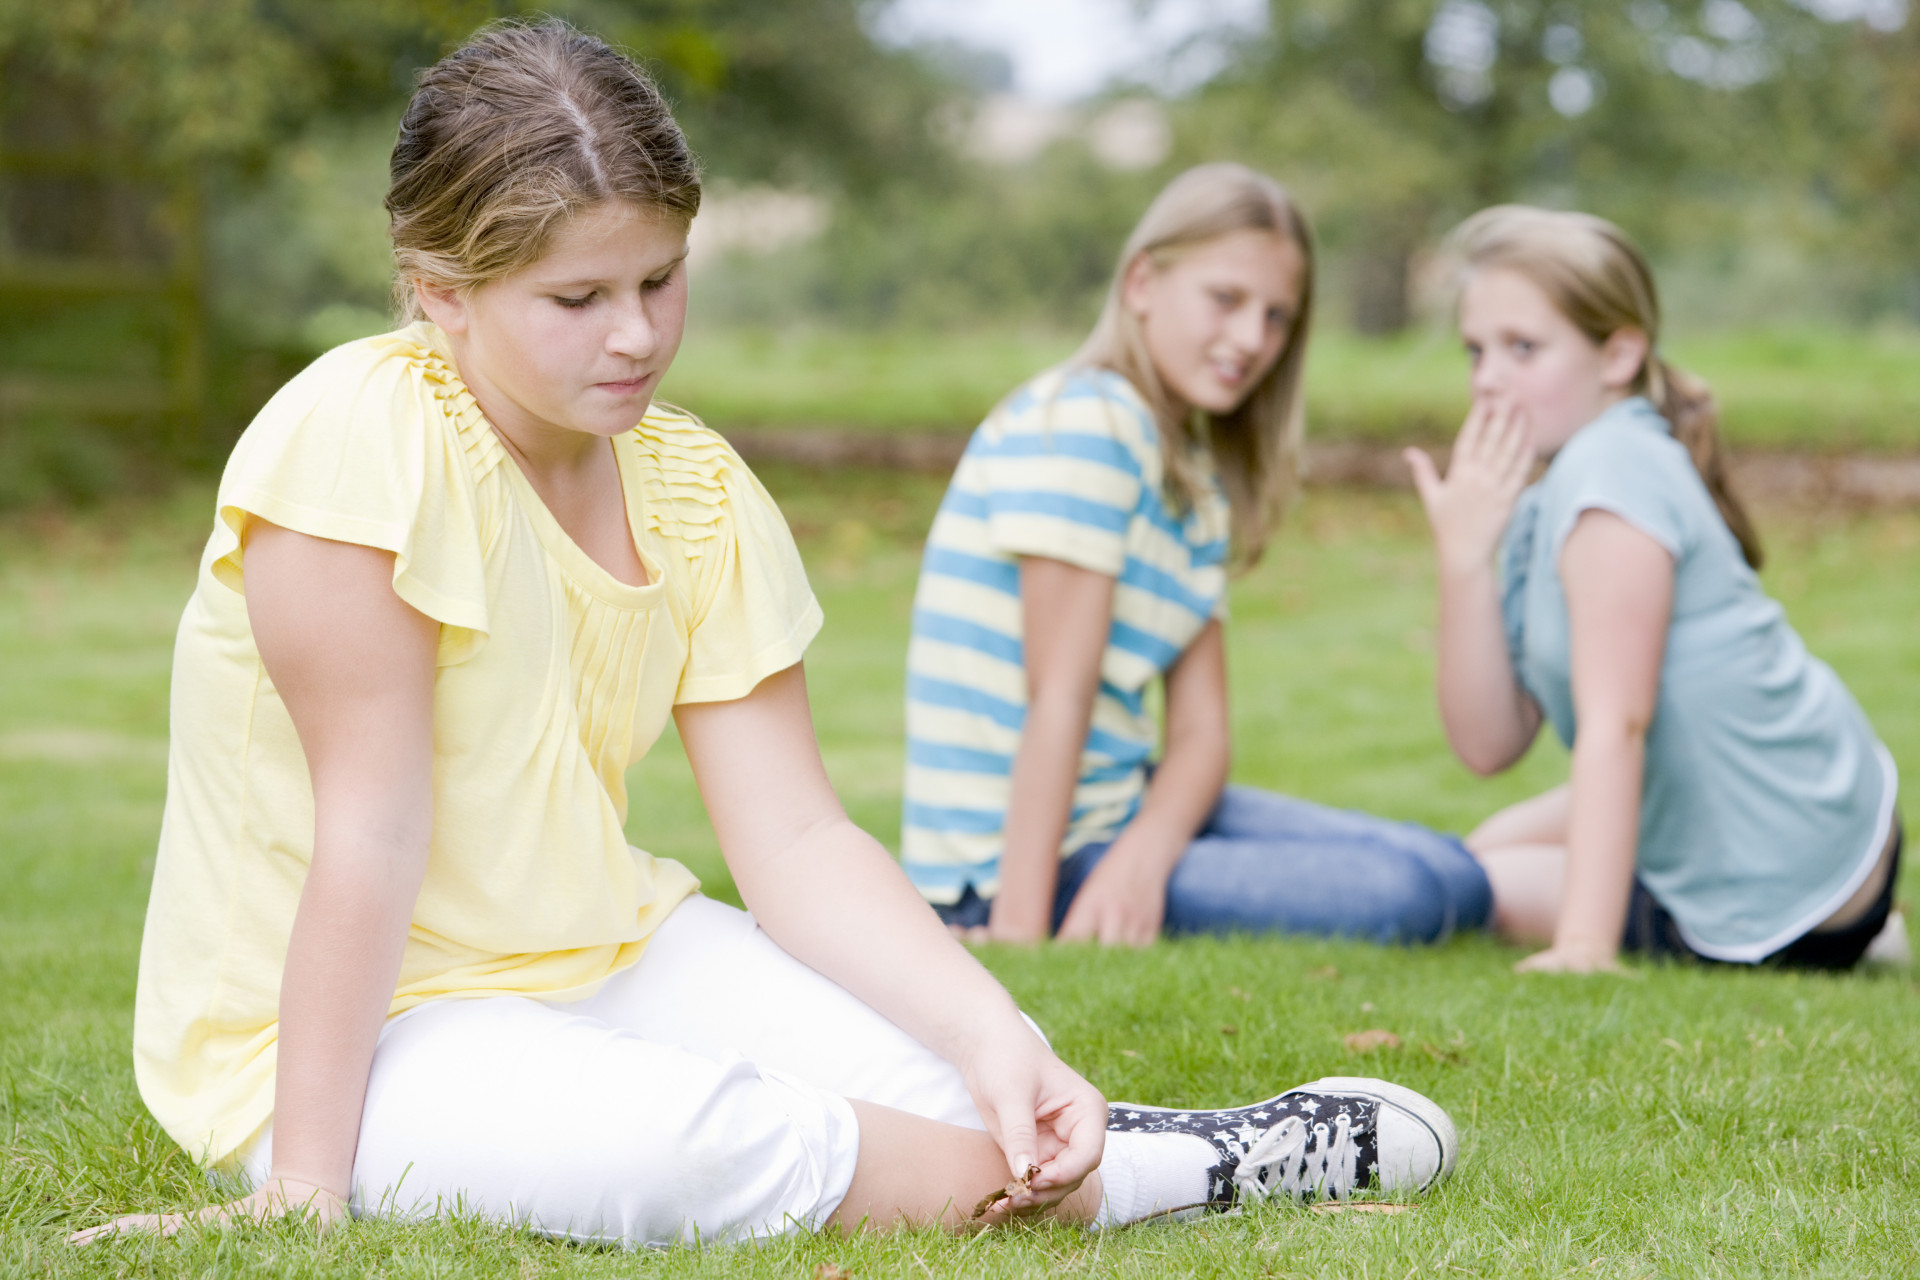 <p>The CDC also notes the psychological side. Overweight children are more vulnerable to anxiety and depression.</p> <p>They are also more vulnerable to low self-esteem as well as bullying and other problems.</p><p>You may also like:<a href="https://www.starsinsider.com/n/438306?utm_source=msn.com&utm_medium=display&utm_campaign=referral_description&utm_content=514640v1en-us"> Amber Tamblyn, David Cross share how couples therapy helped both on- and off-screen</a></p>